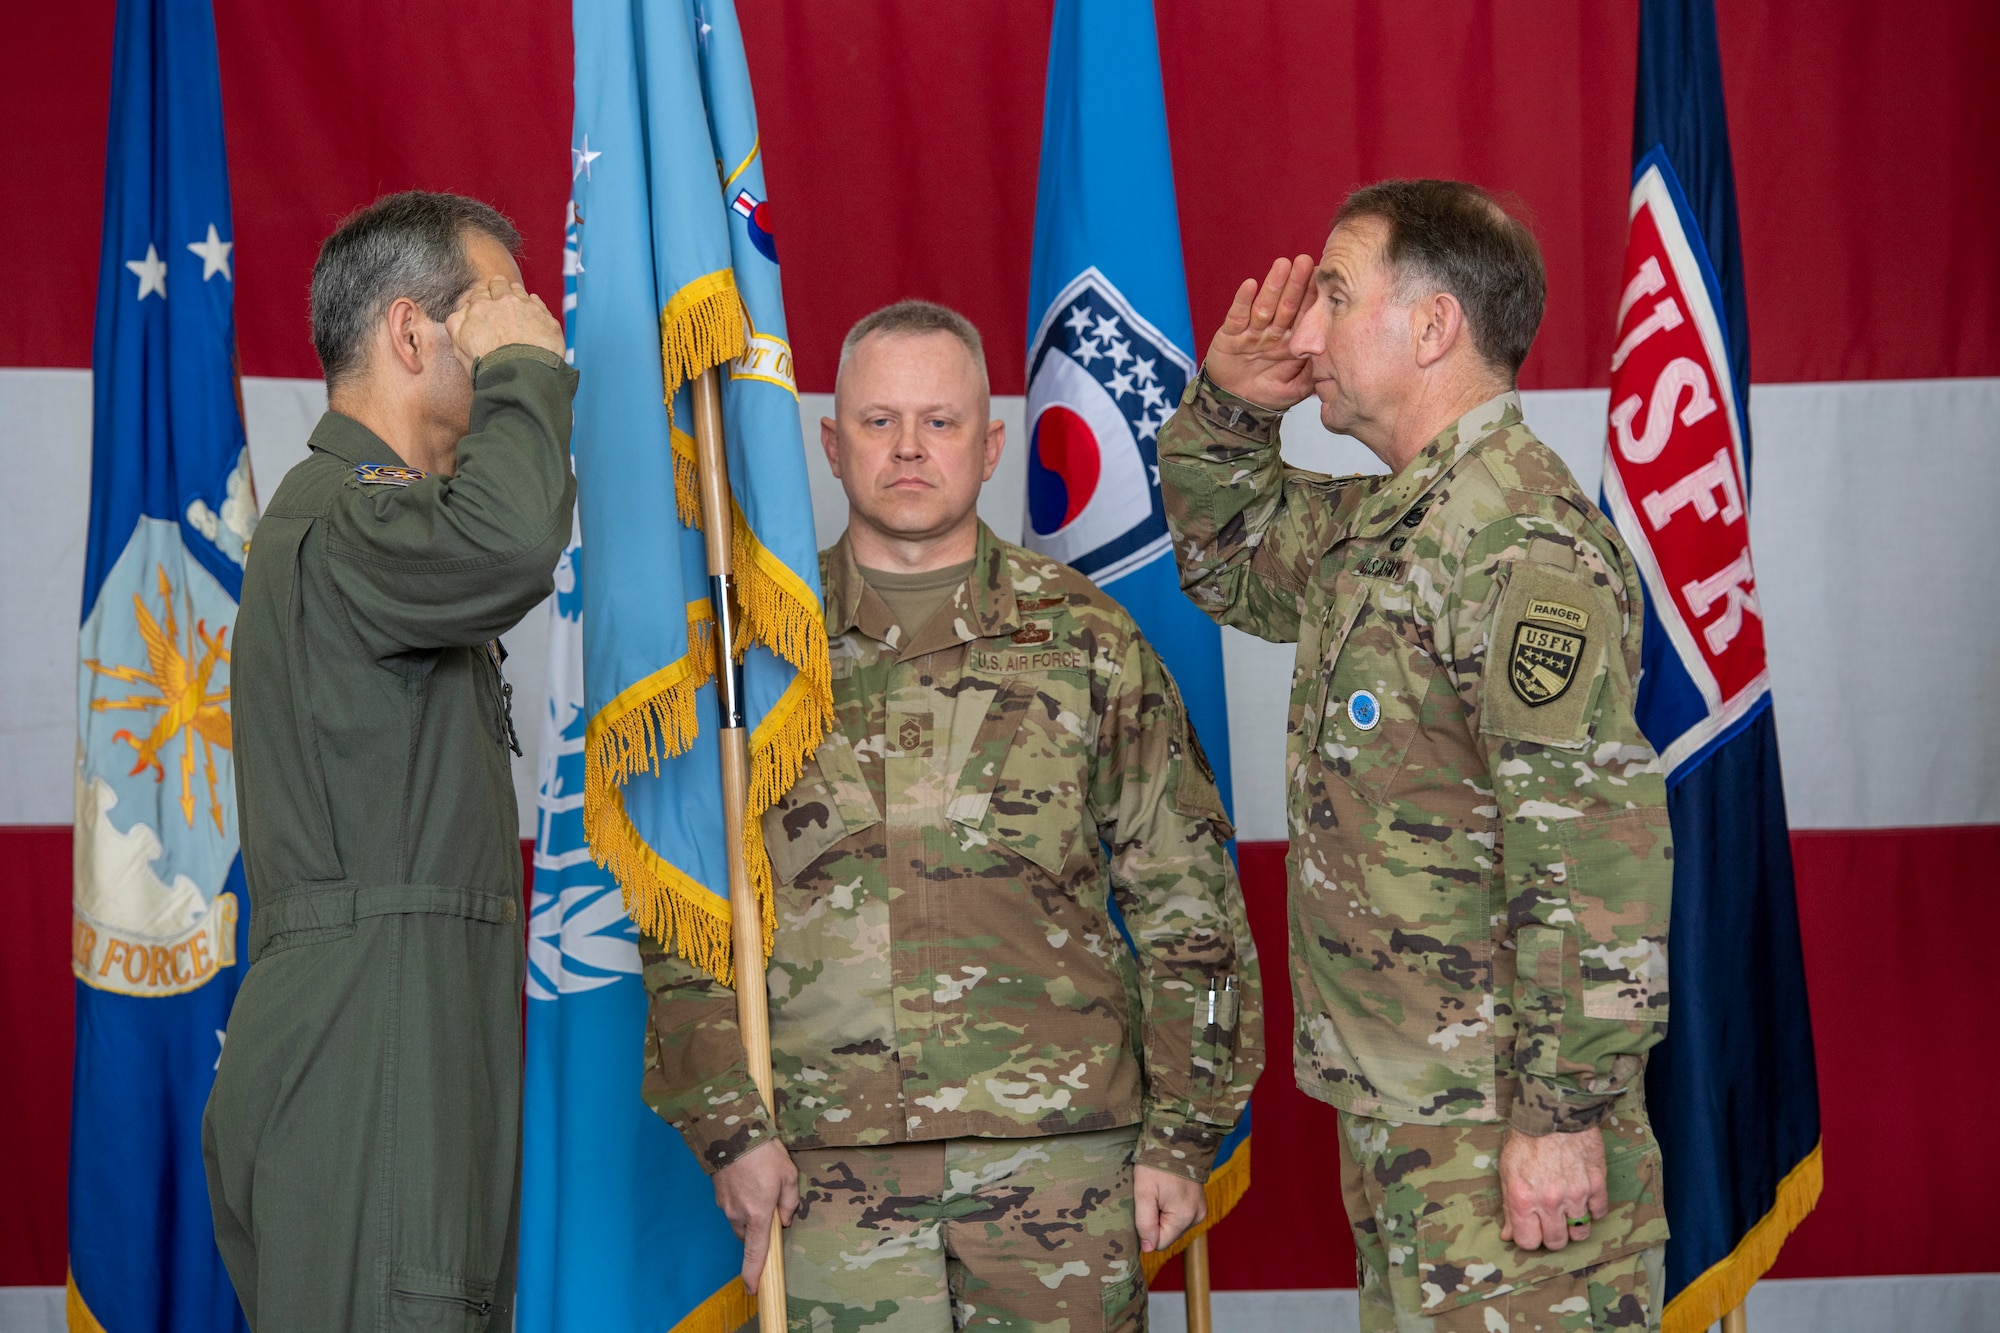 Lt. Gen. Kenneth S. Wilsbach salutes Gen. Robert “Abe” Abrams, Commander, United Nations Command/Combined Forces Command/United States Forces Korea, as Chief Master Sgt. Philip Hudson, Seventh Air Force command chief holds a flag at Osan Air Base, ROK, June 12, 2020. Due to COVID-19 mitigation restriction, no official passing of the flag was conducted. (U.S. Air Force photo by Senior Airman Darien Perez)